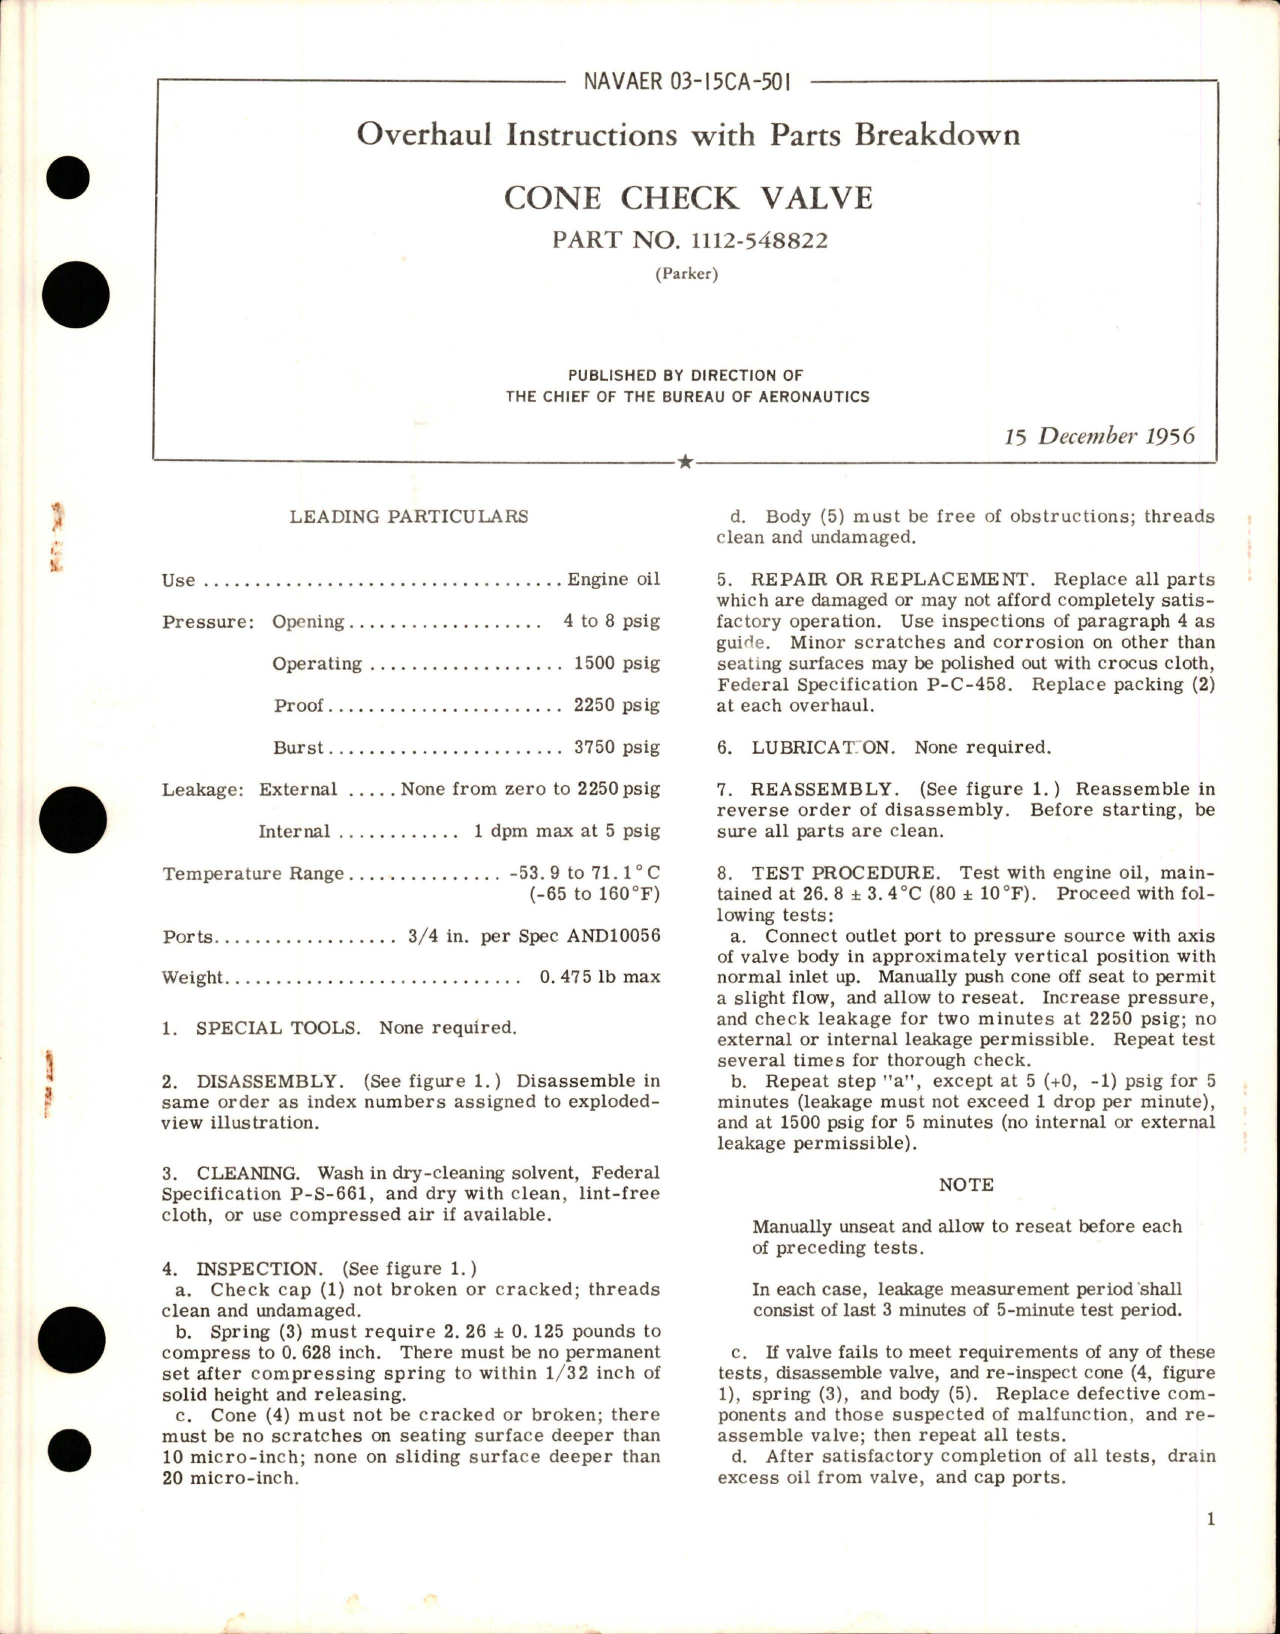 Sample page 1 from AirCorps Library document: Overhaul Instructions with Parts Breakdown for Cone Check Valve - Part 1112-548822